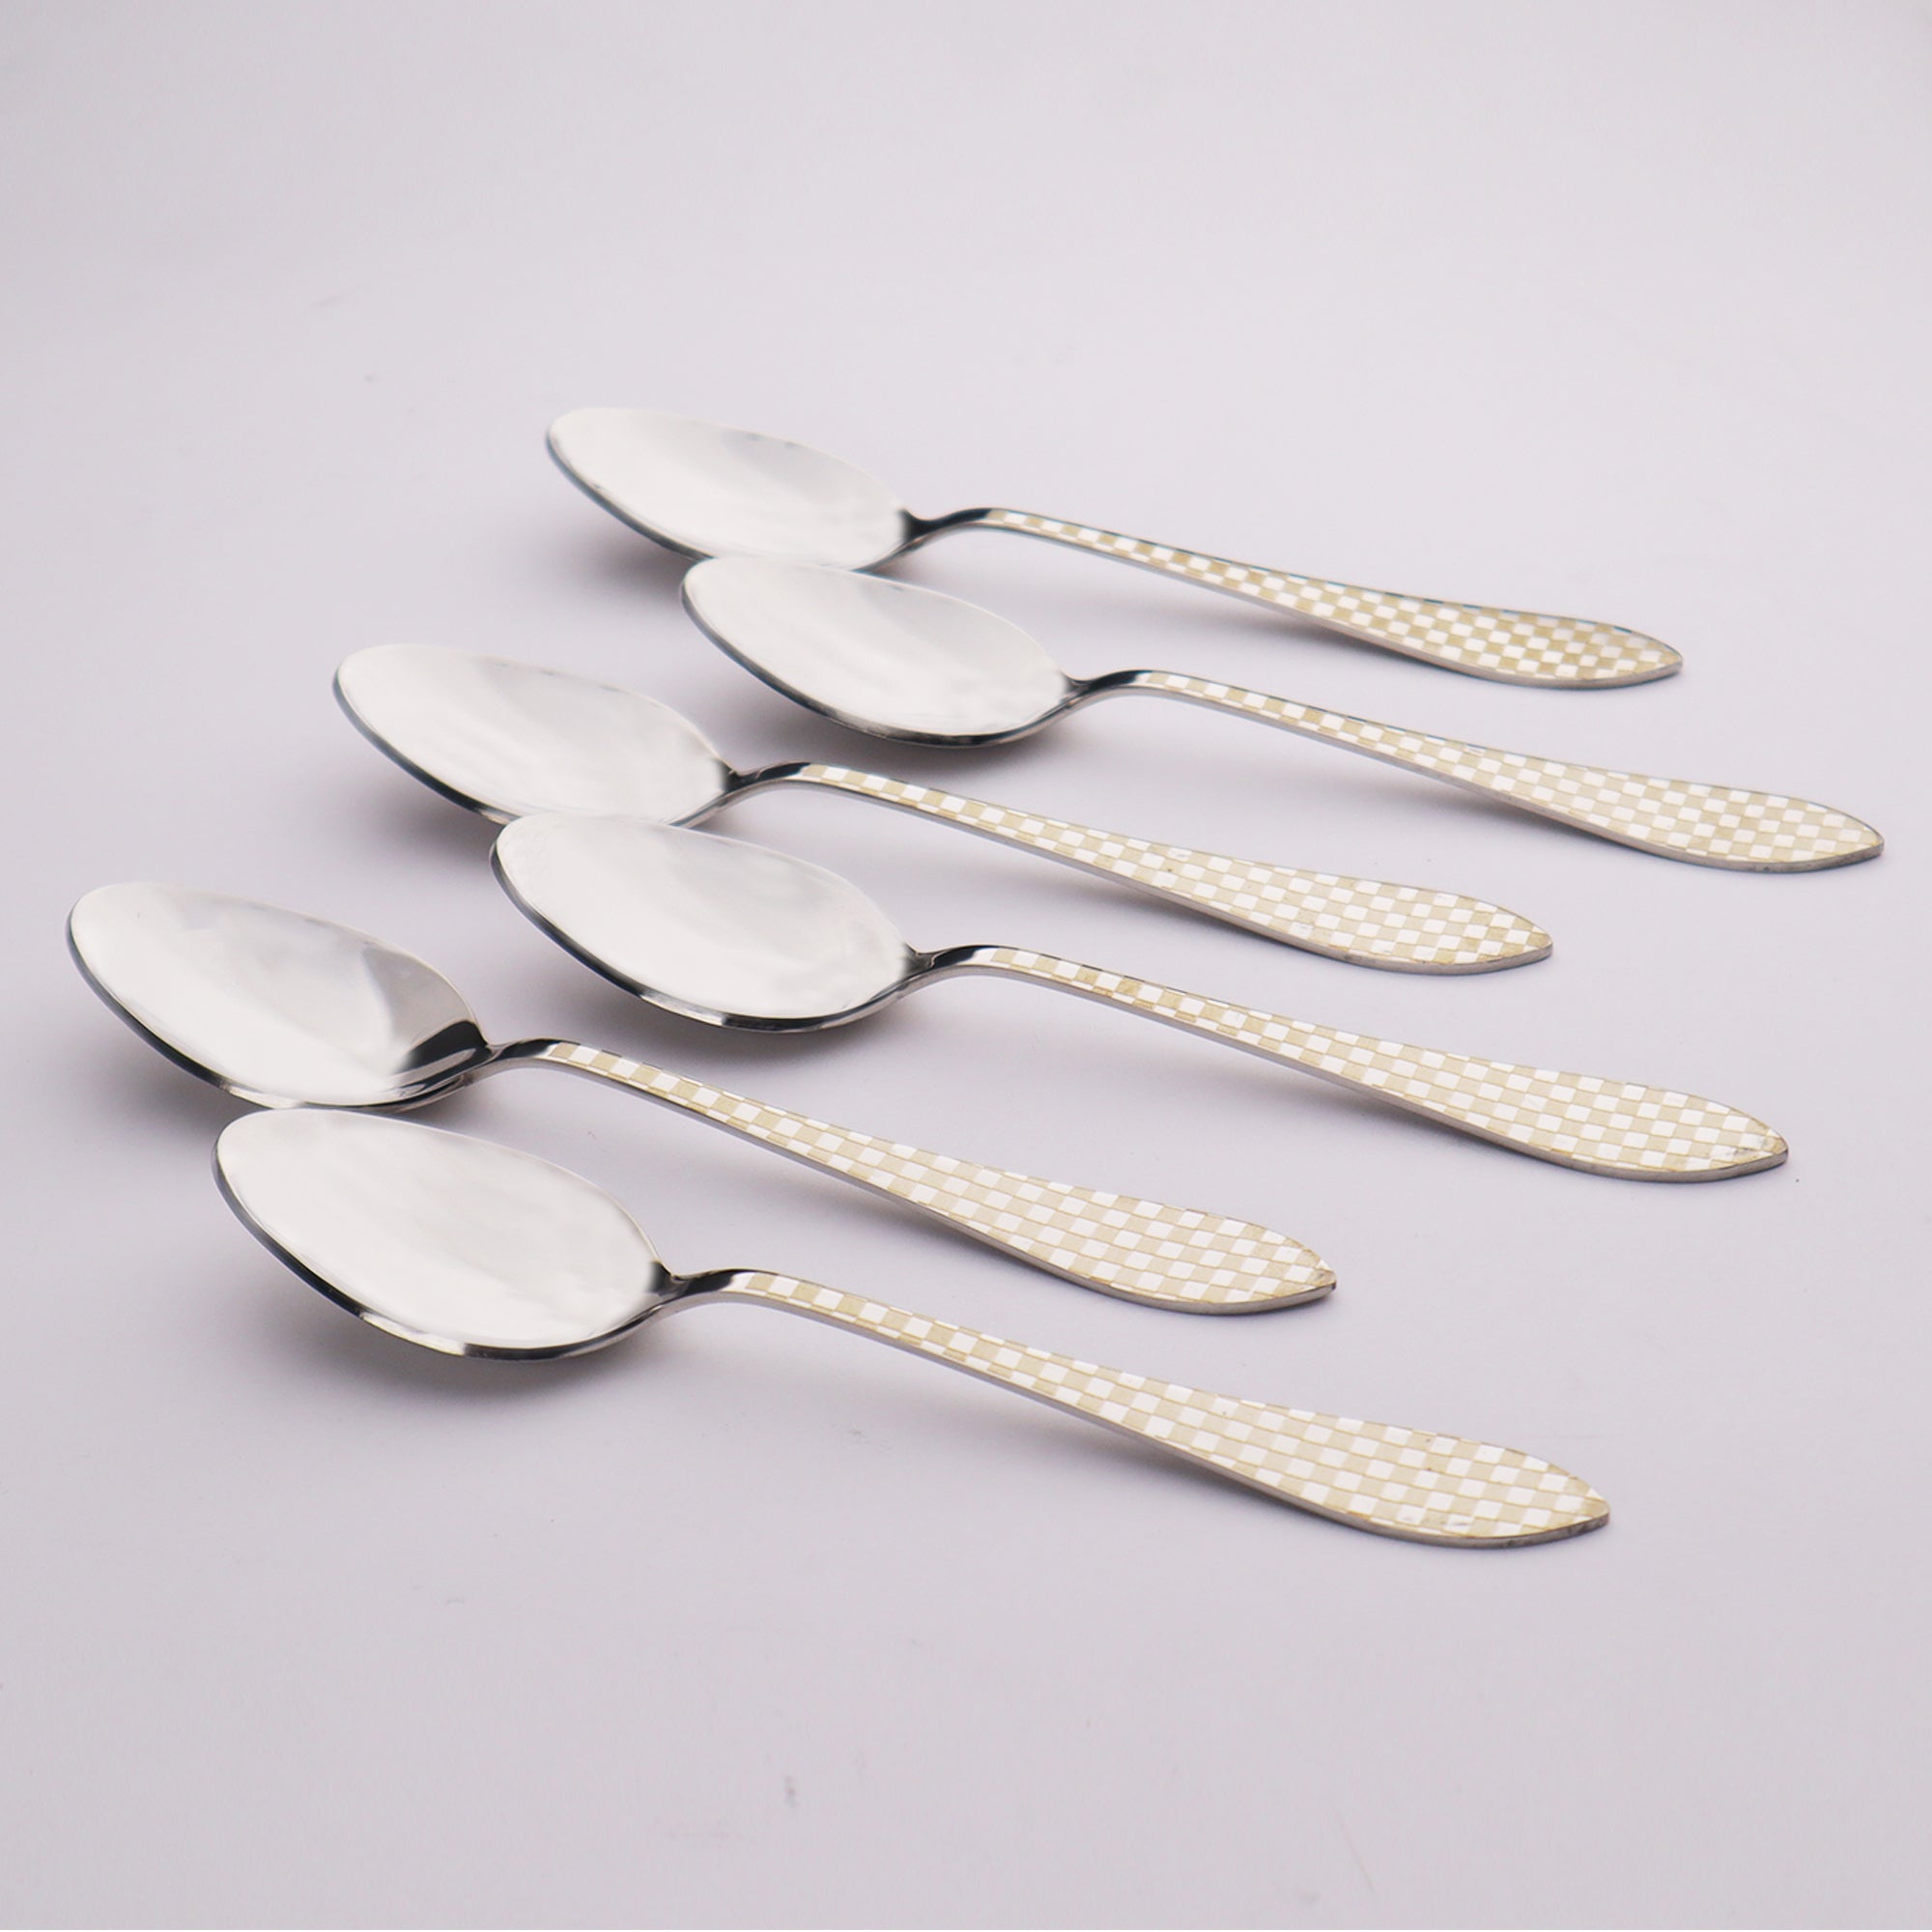 chef best quality stainless steel cutlery table spoon tea spoon baby spoon kitchen cutlery at best price in pakistan - majestic chef 